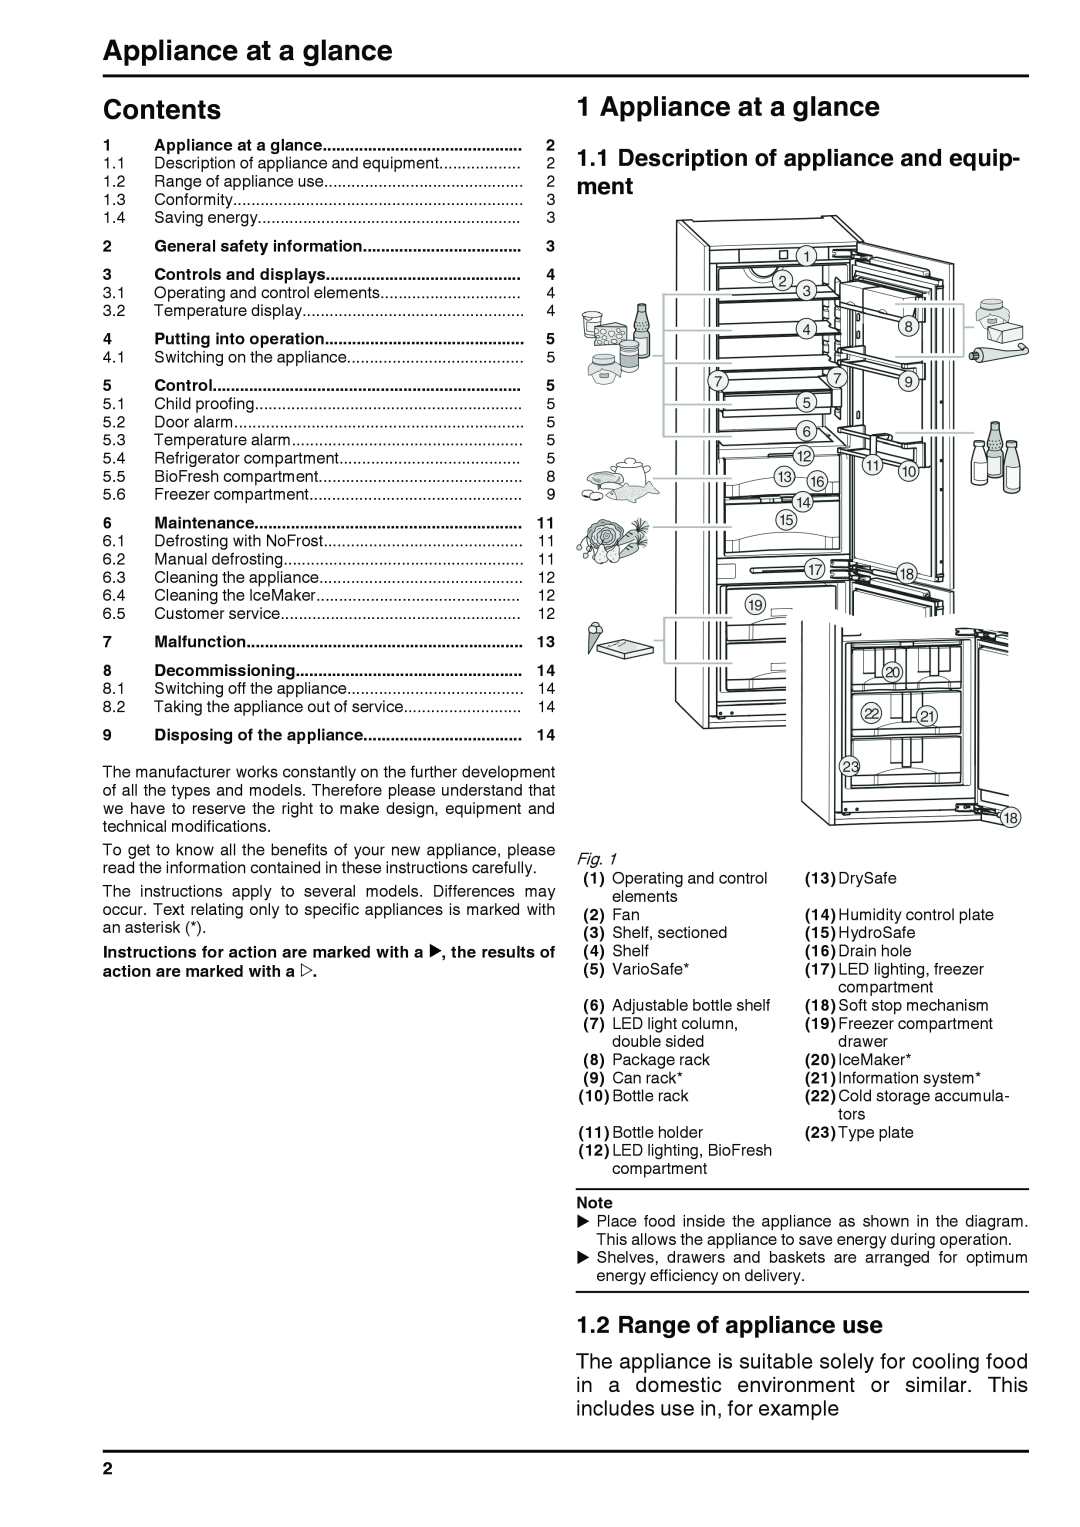 Liebherr 180613 7085462-00 Appliance at a glance, Contents, Description of appliance and equip- ment, Control, Maintenance 